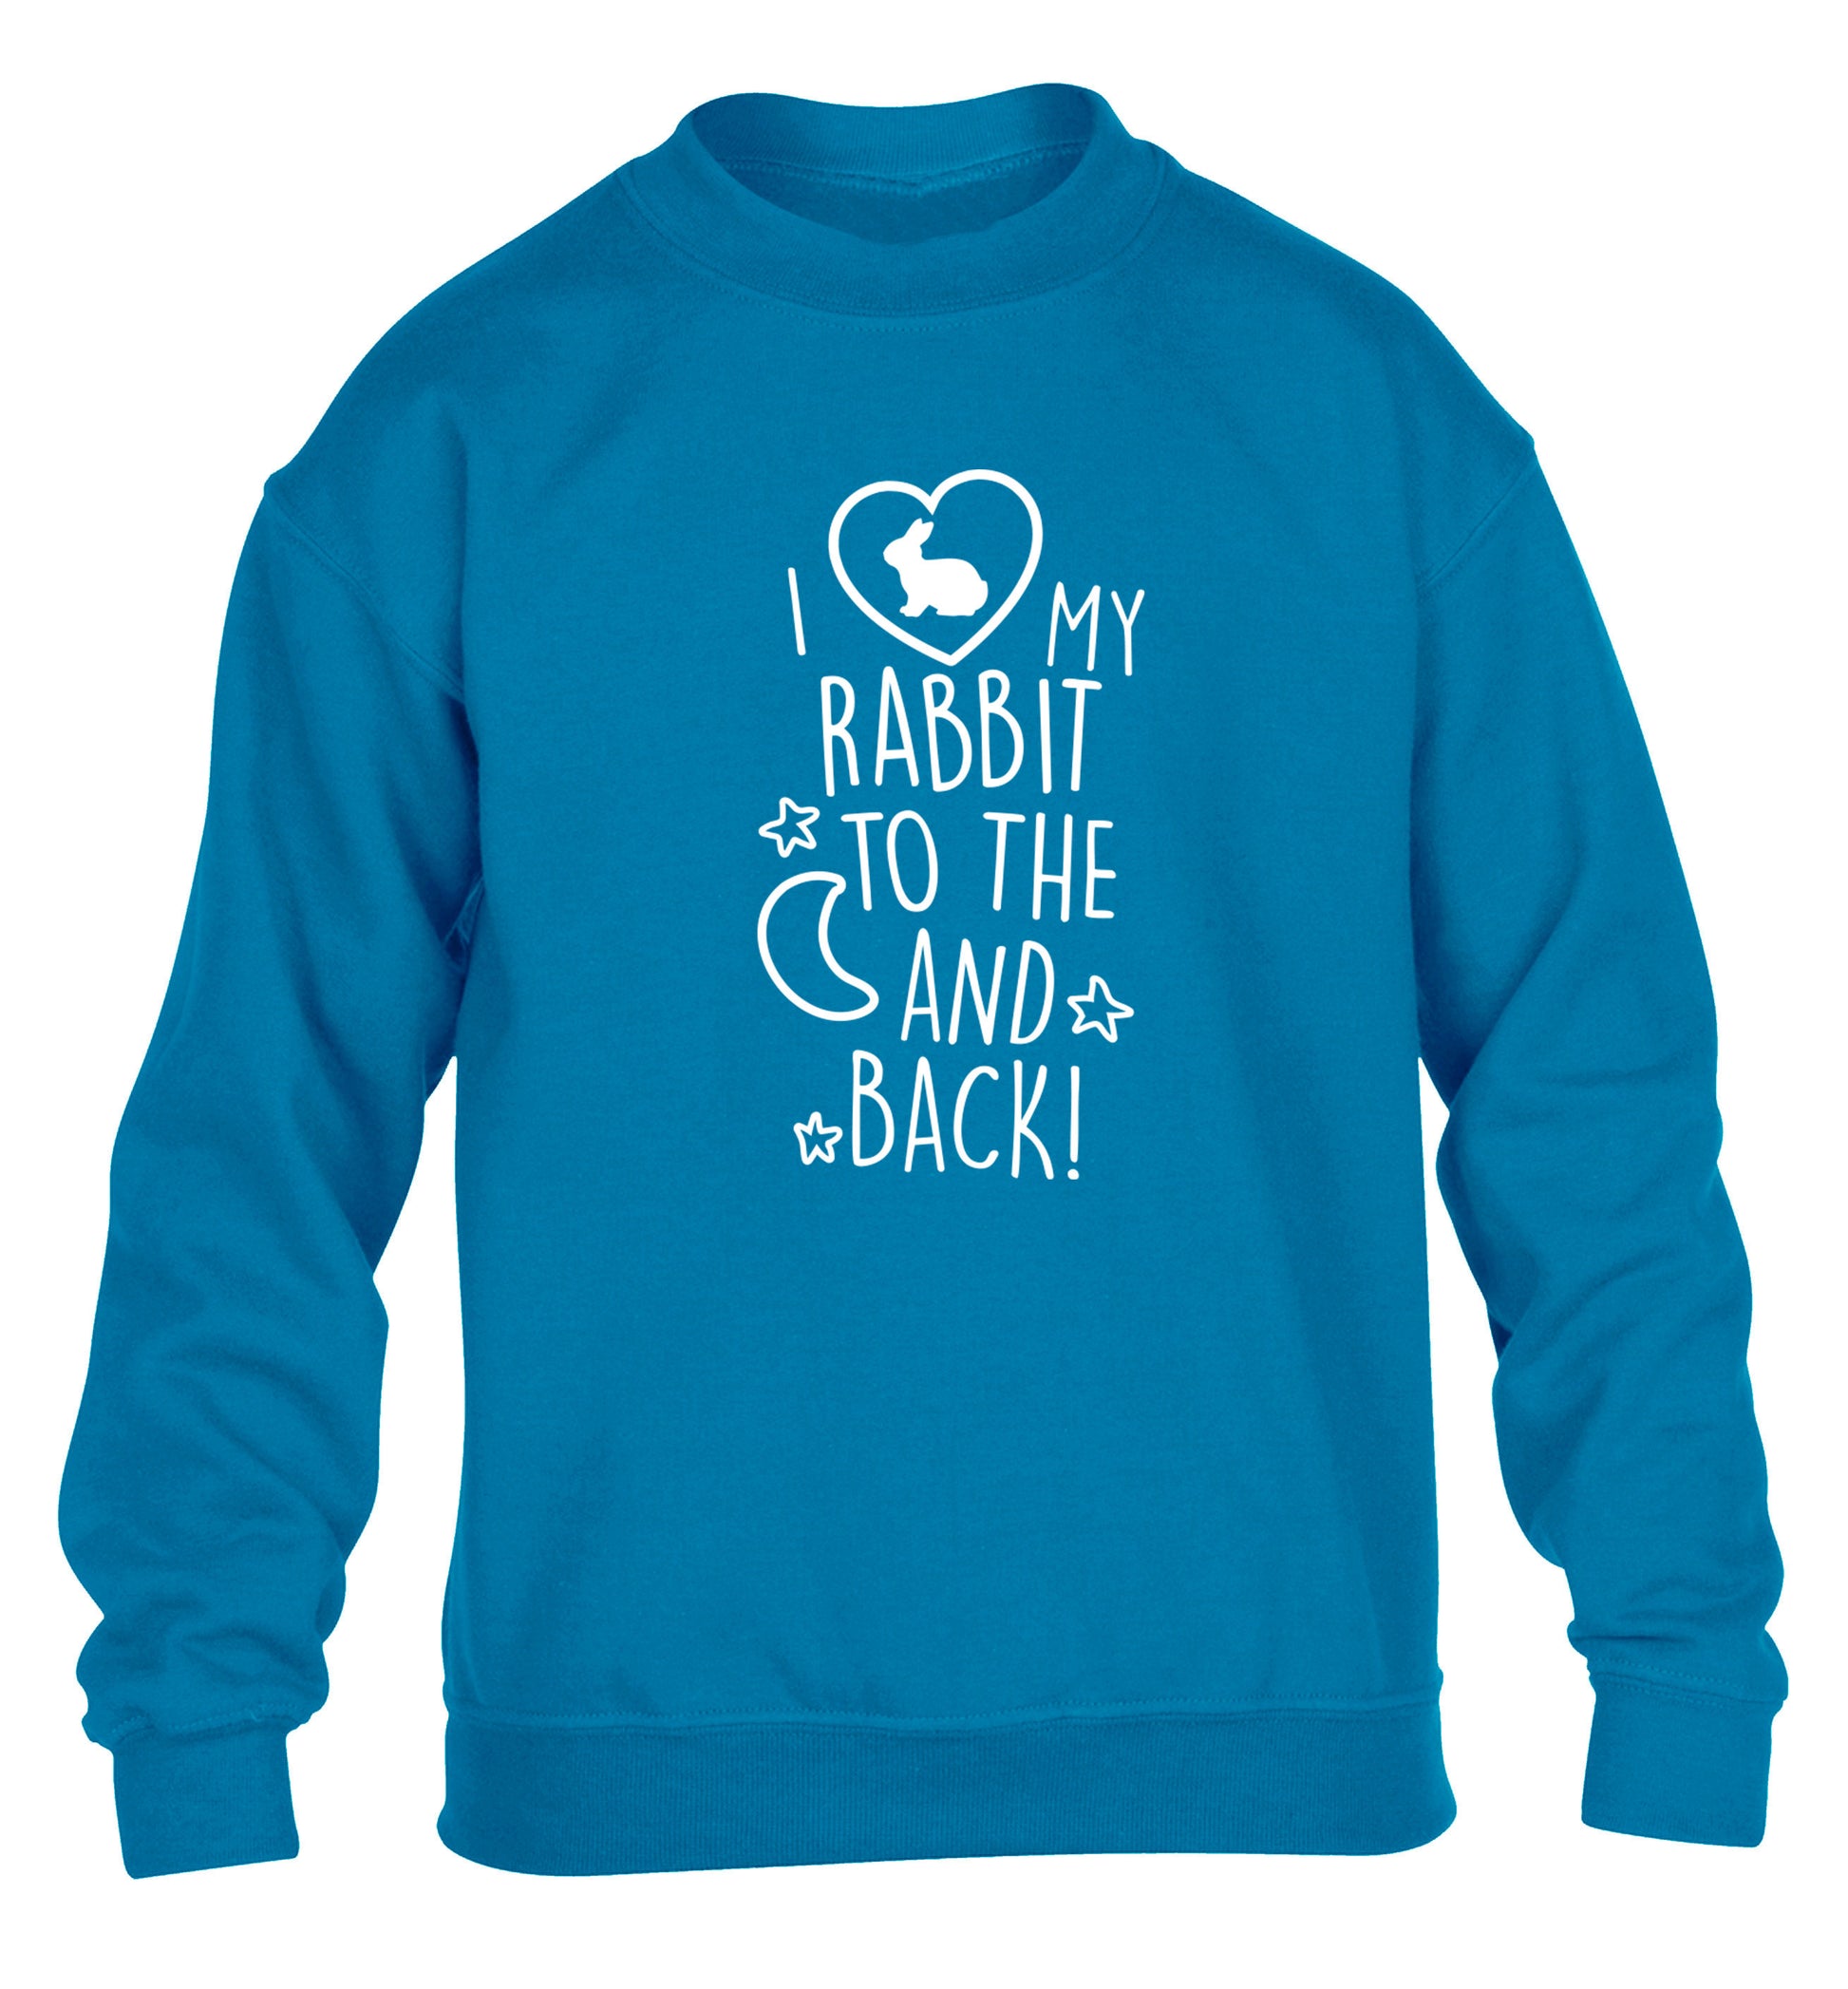 I love my rabbit to the moon and back children's blue  sweater 12-14 Years